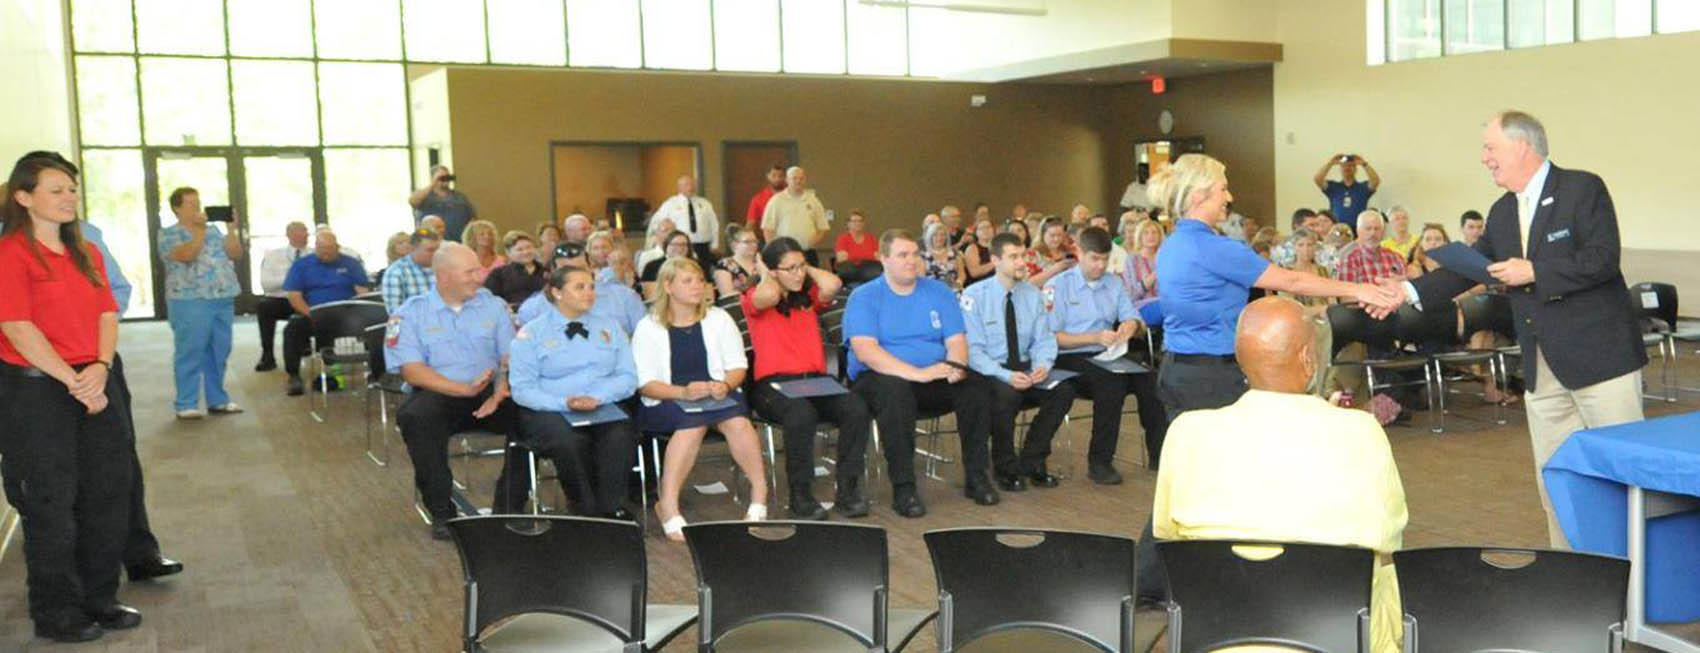 Read the full story, CCCC graduates 60 from EMS program